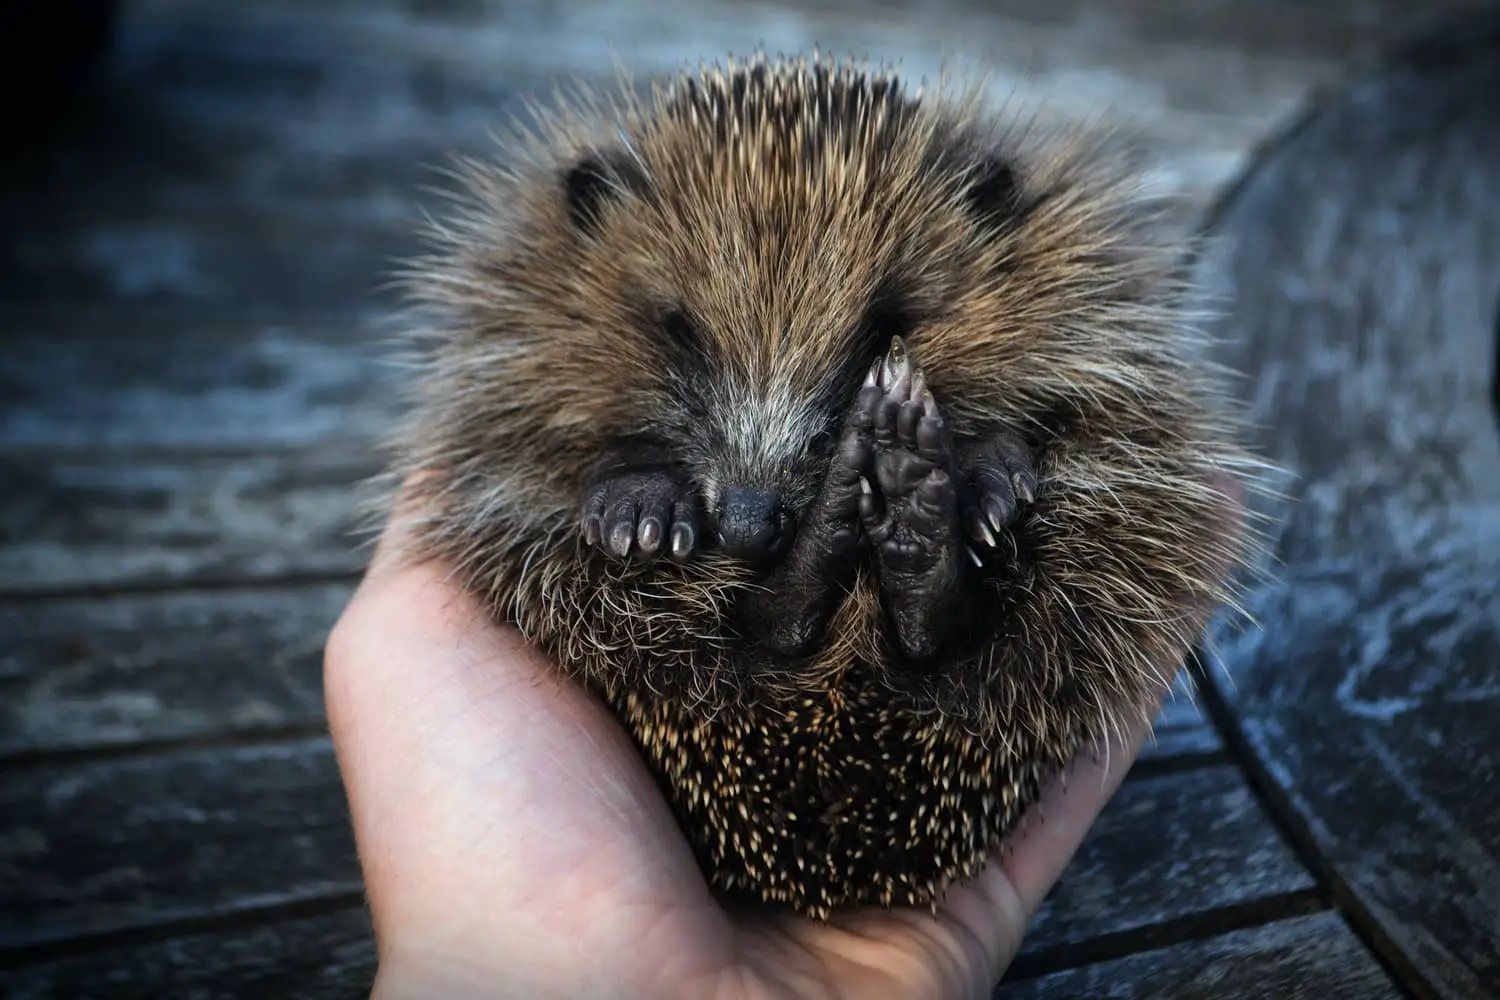 Hedgehog curled up in someone's hand